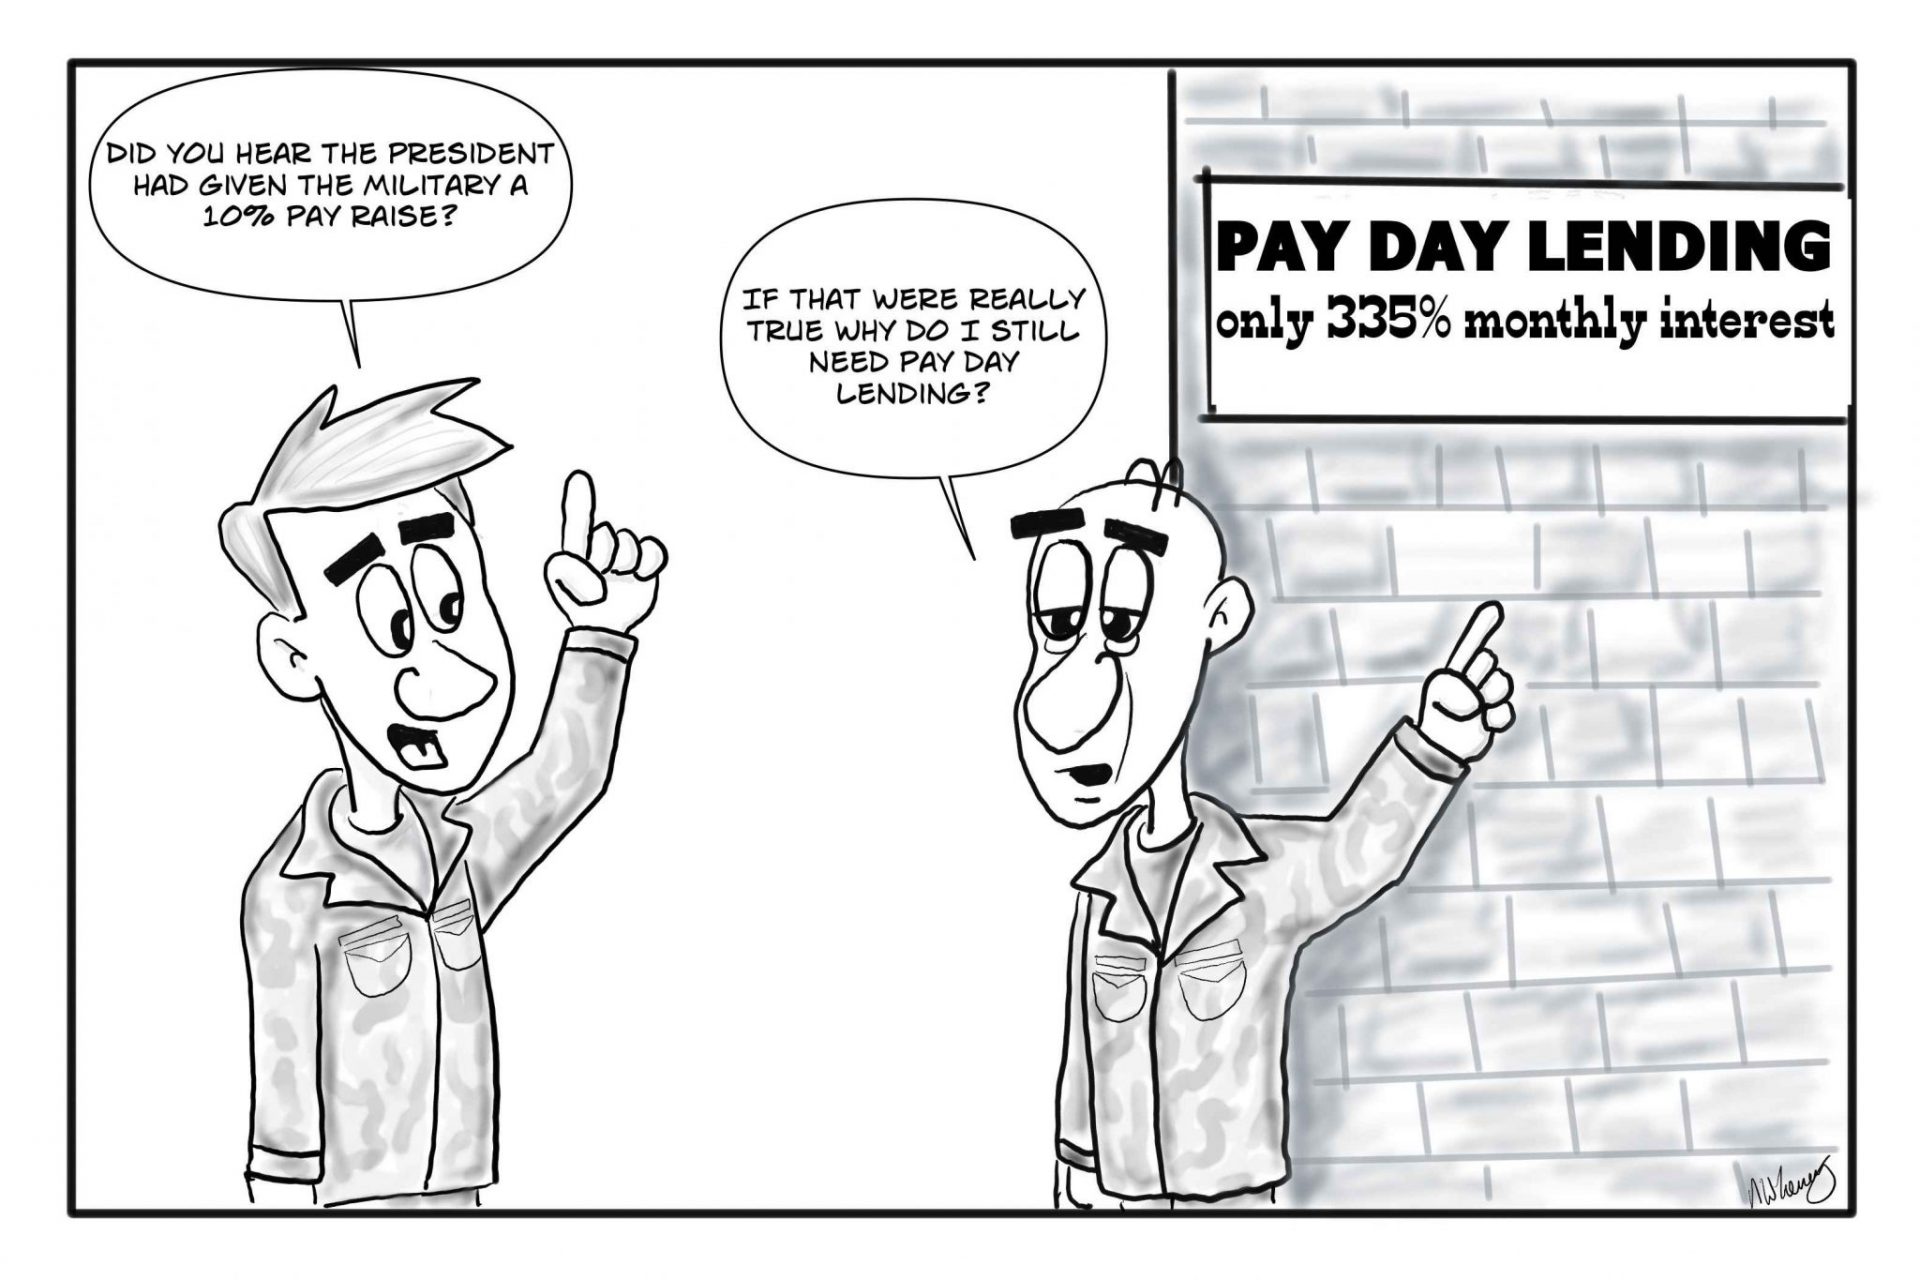 military-pay-raise-army-humor-pay-day-lending